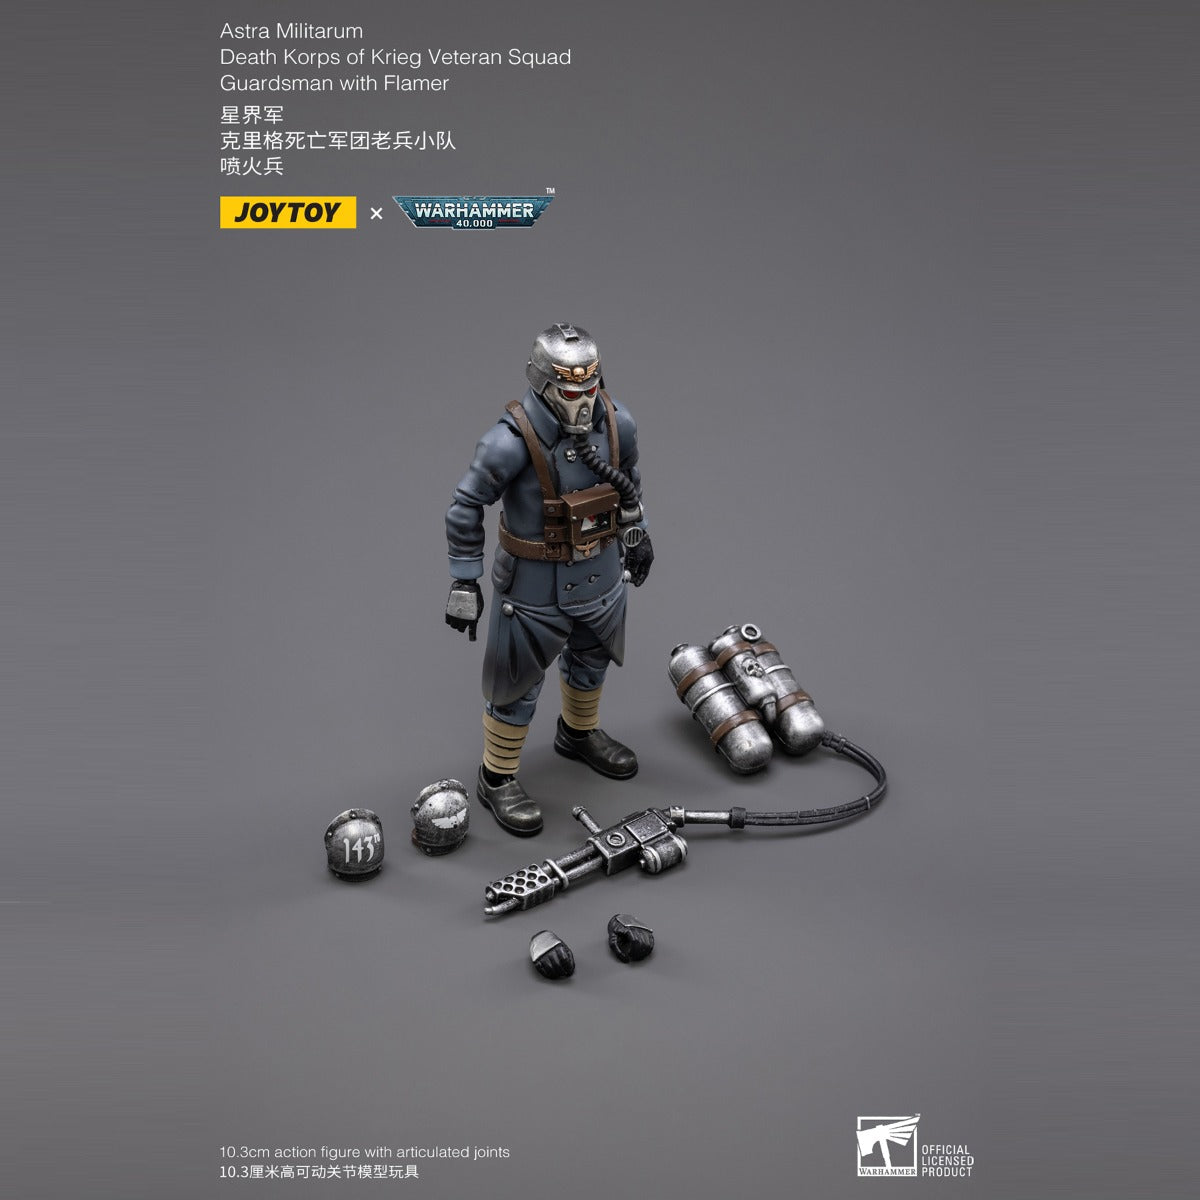 Warhammer Collectibles: 1/18 Scale Death Korps of Krieg Veteran Squad Guardsman with Flamer